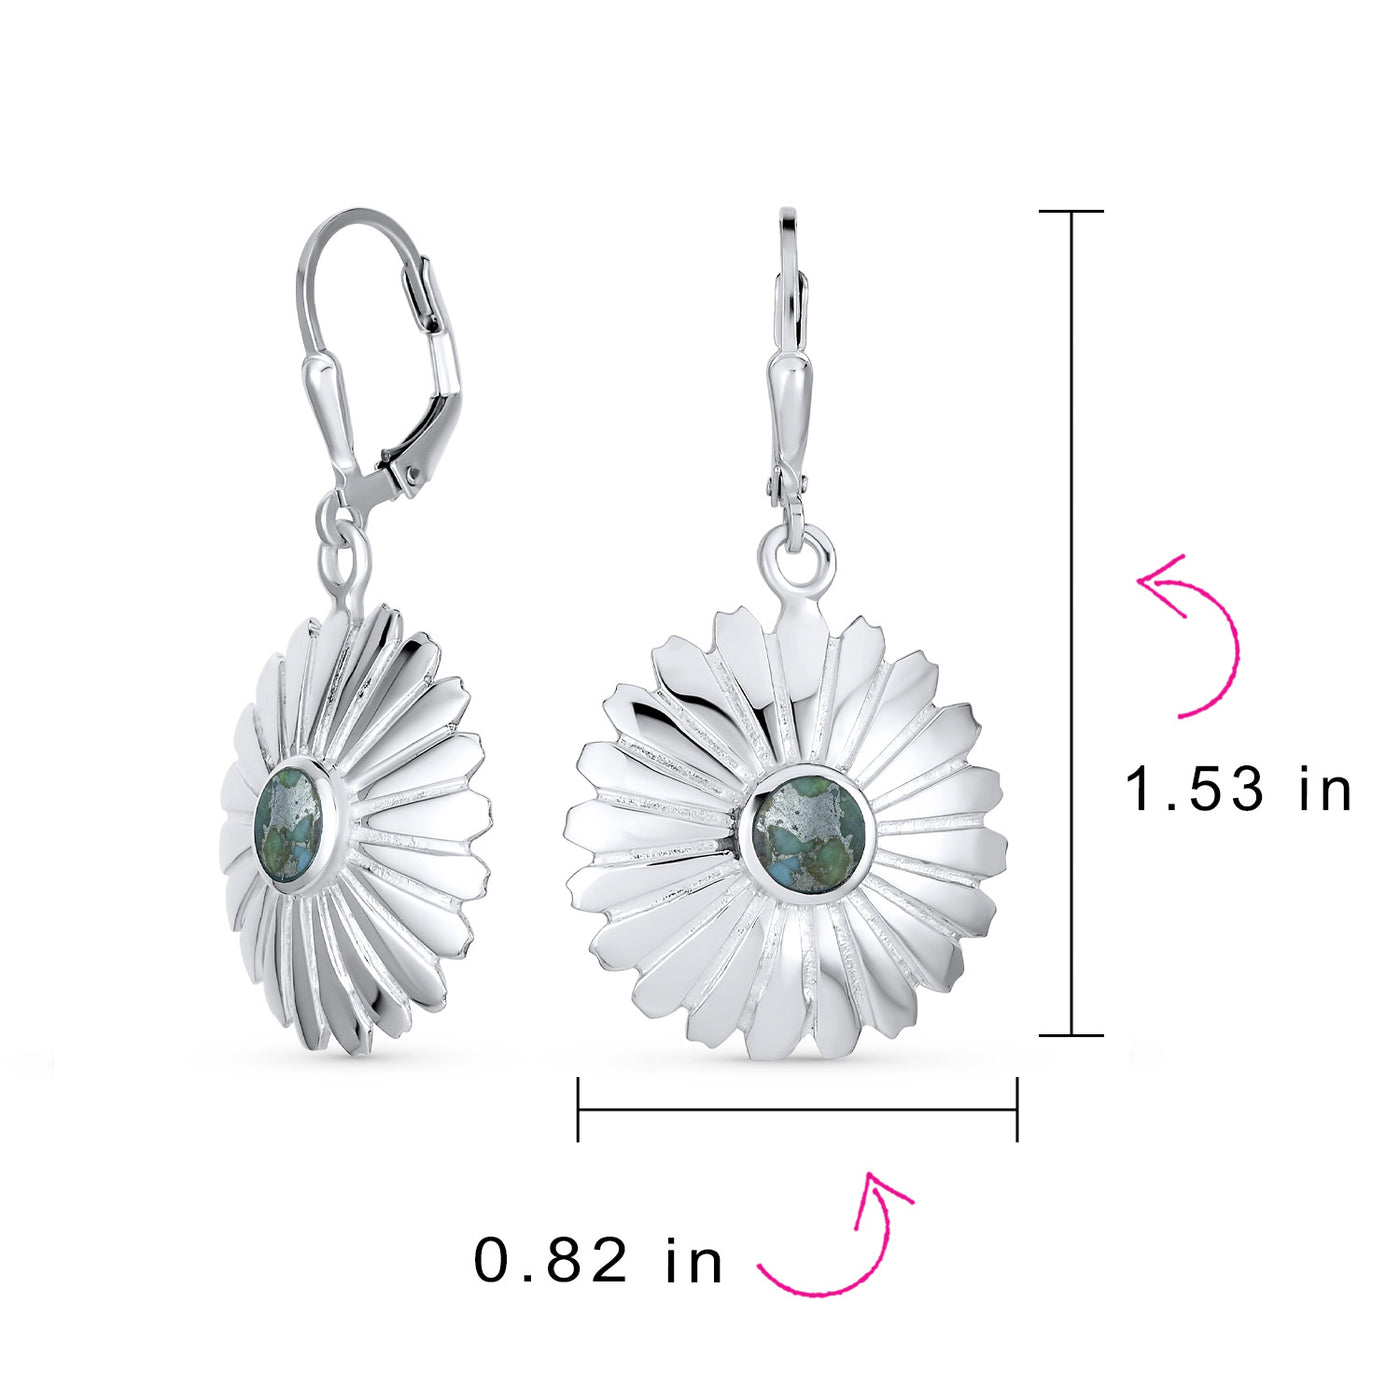 Carved Flower Blossom Turquoise Dangle Western Earrings .925 Silver